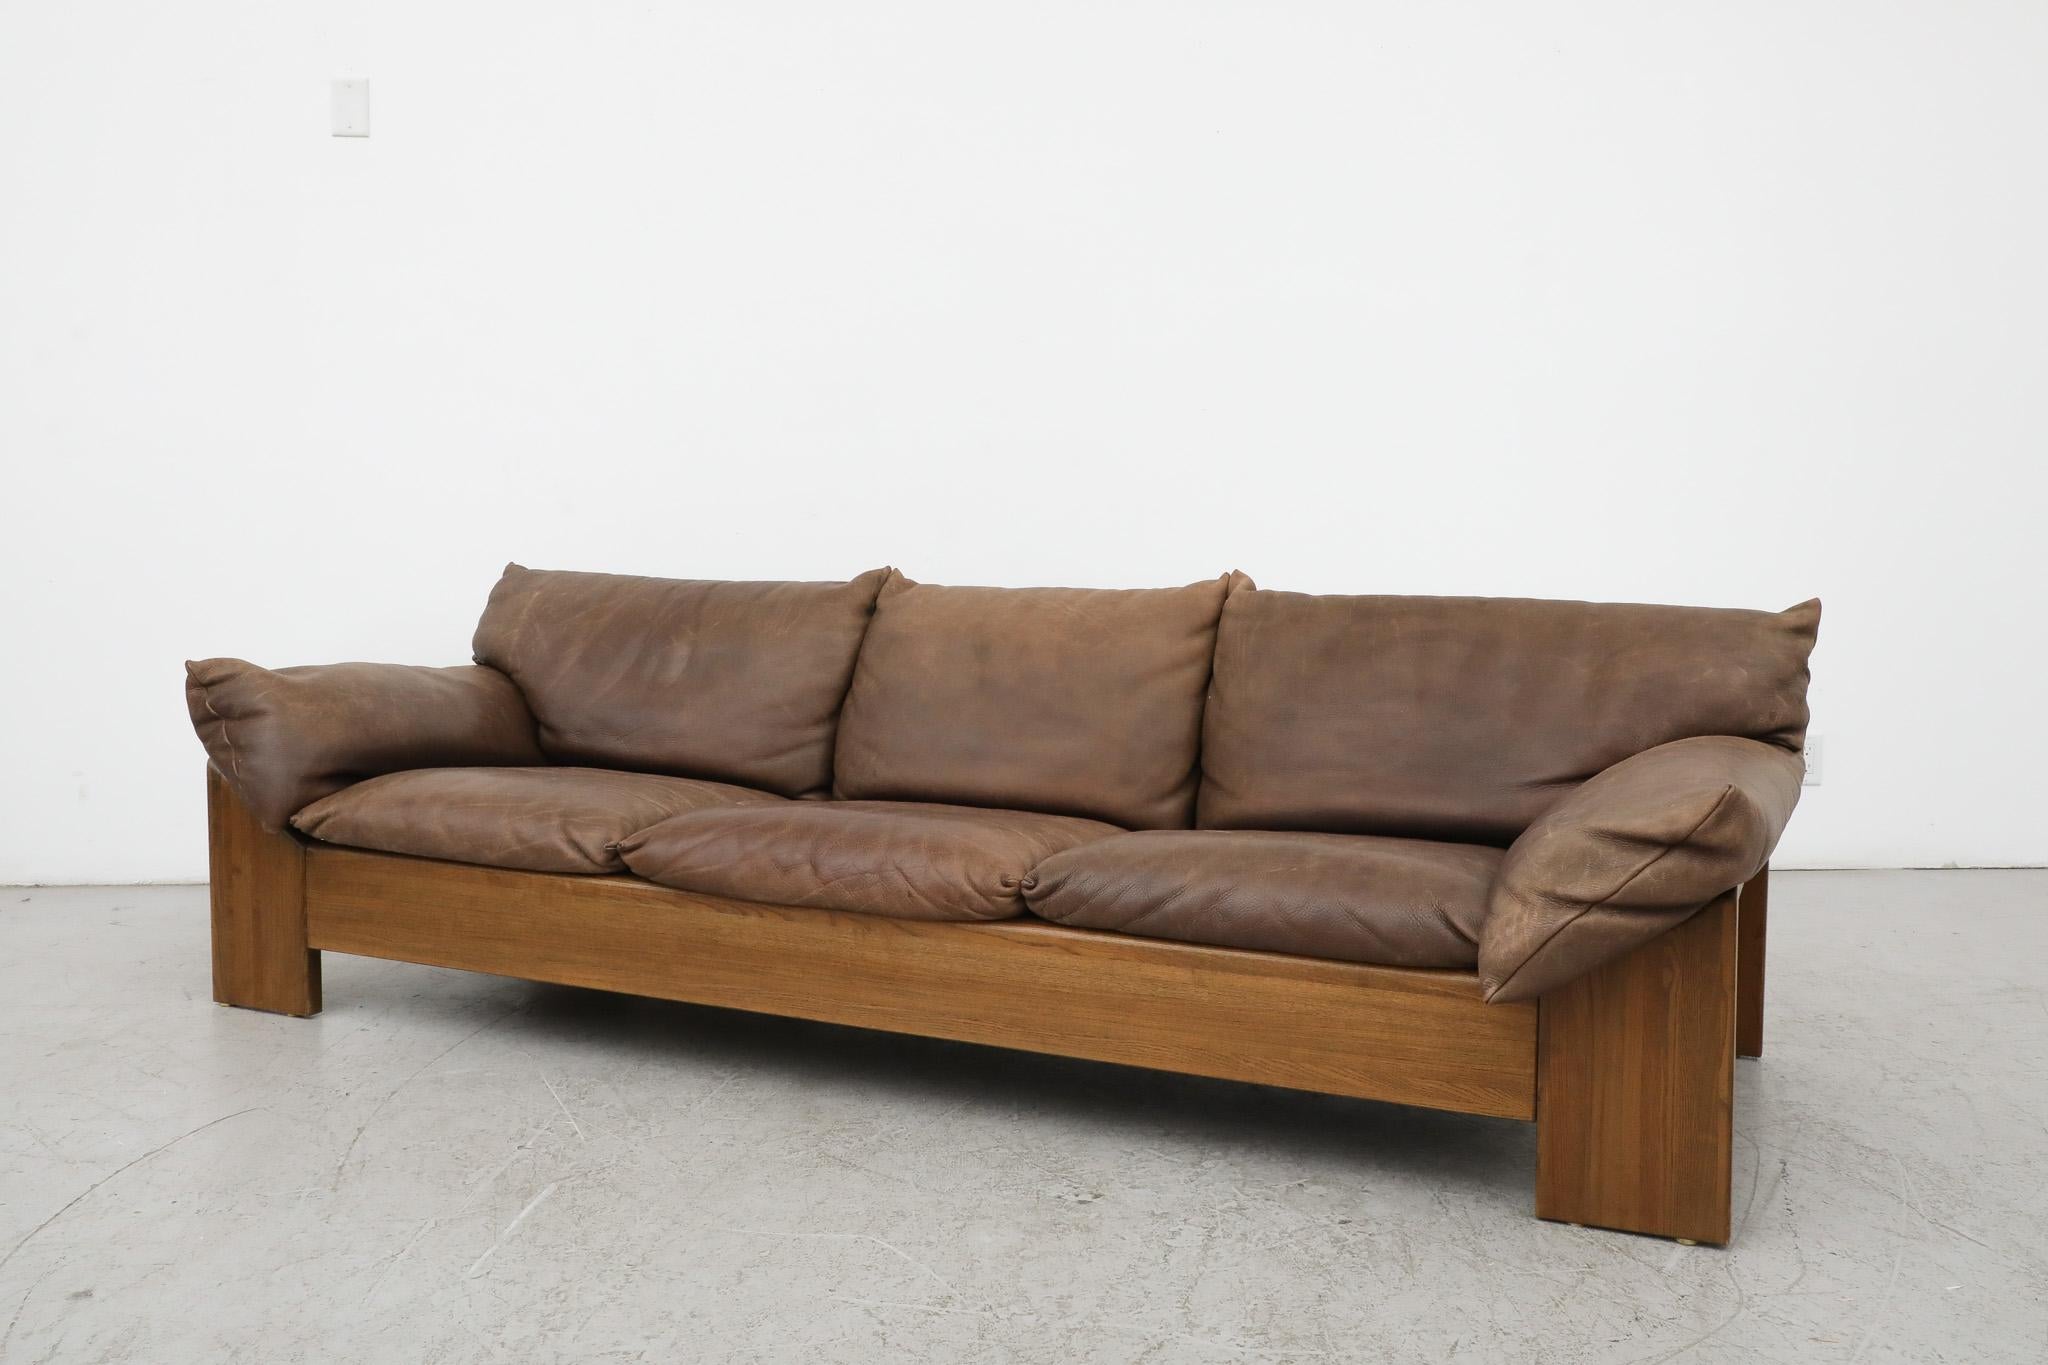 70s wood frame couch for sale